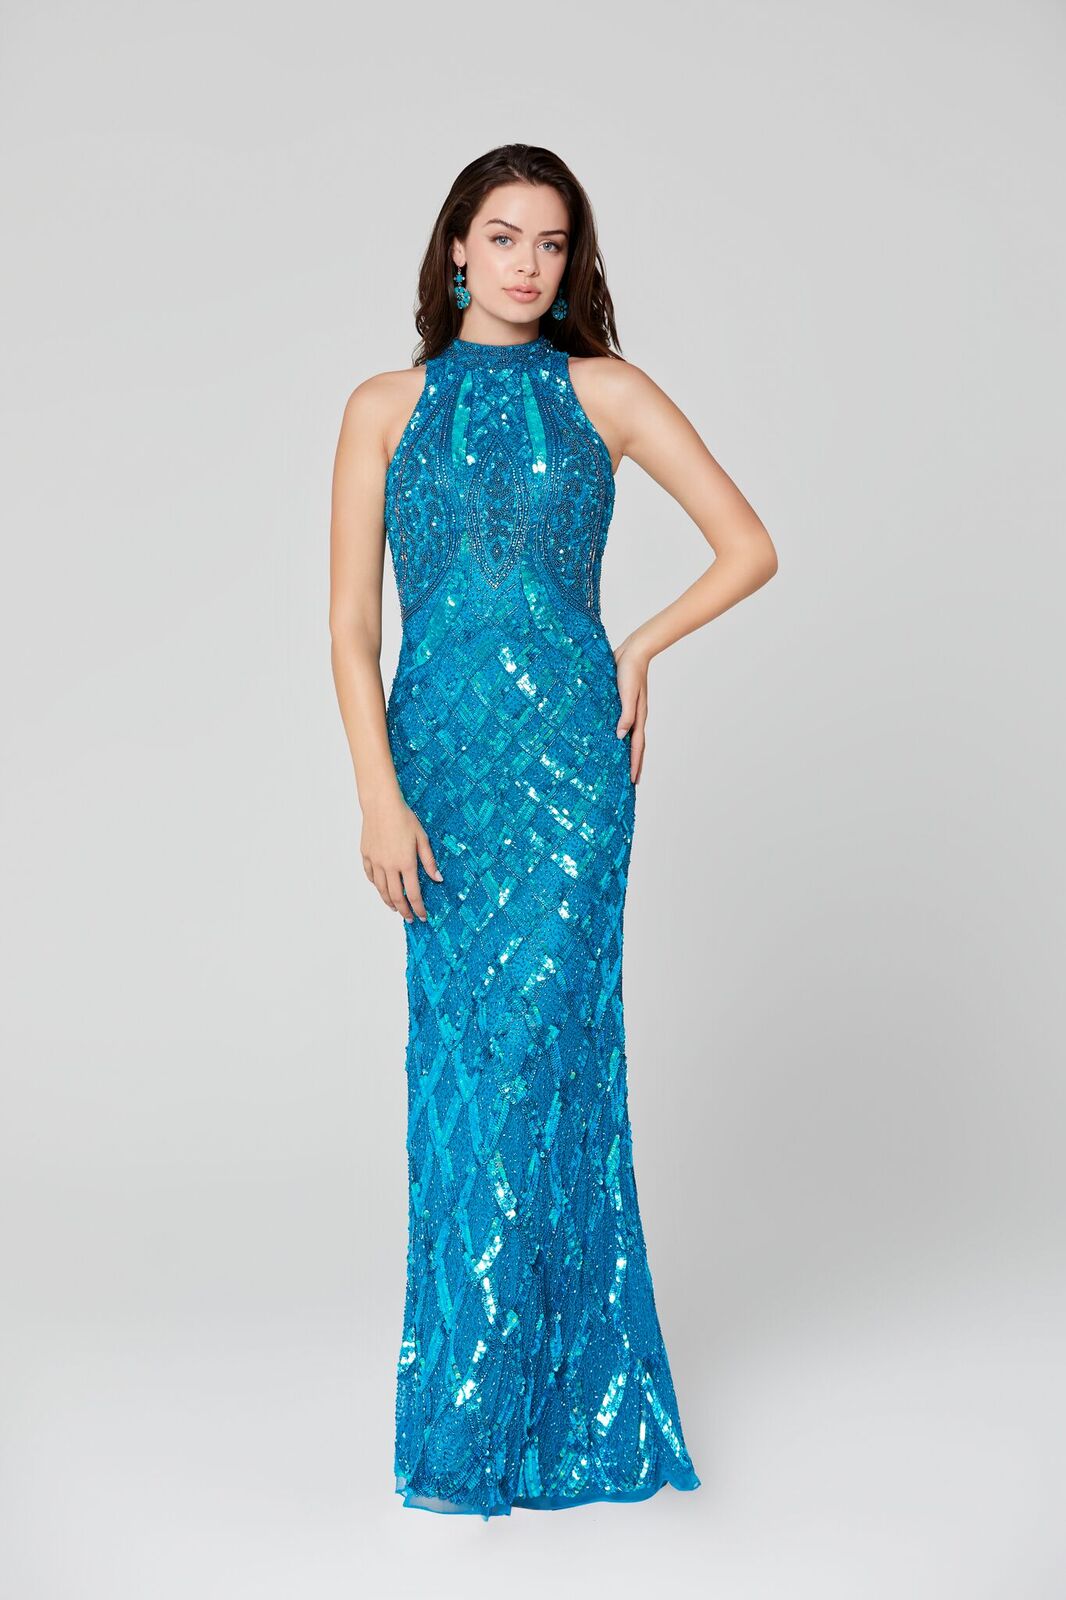 Primavera Couture 3442 high neckline and high back sleeveless fully beaded sequins evening gown.  Beaded High Neckline Prom Dress Formal Evening Gown.  Available colors:  Peacock  Available sizes:  18